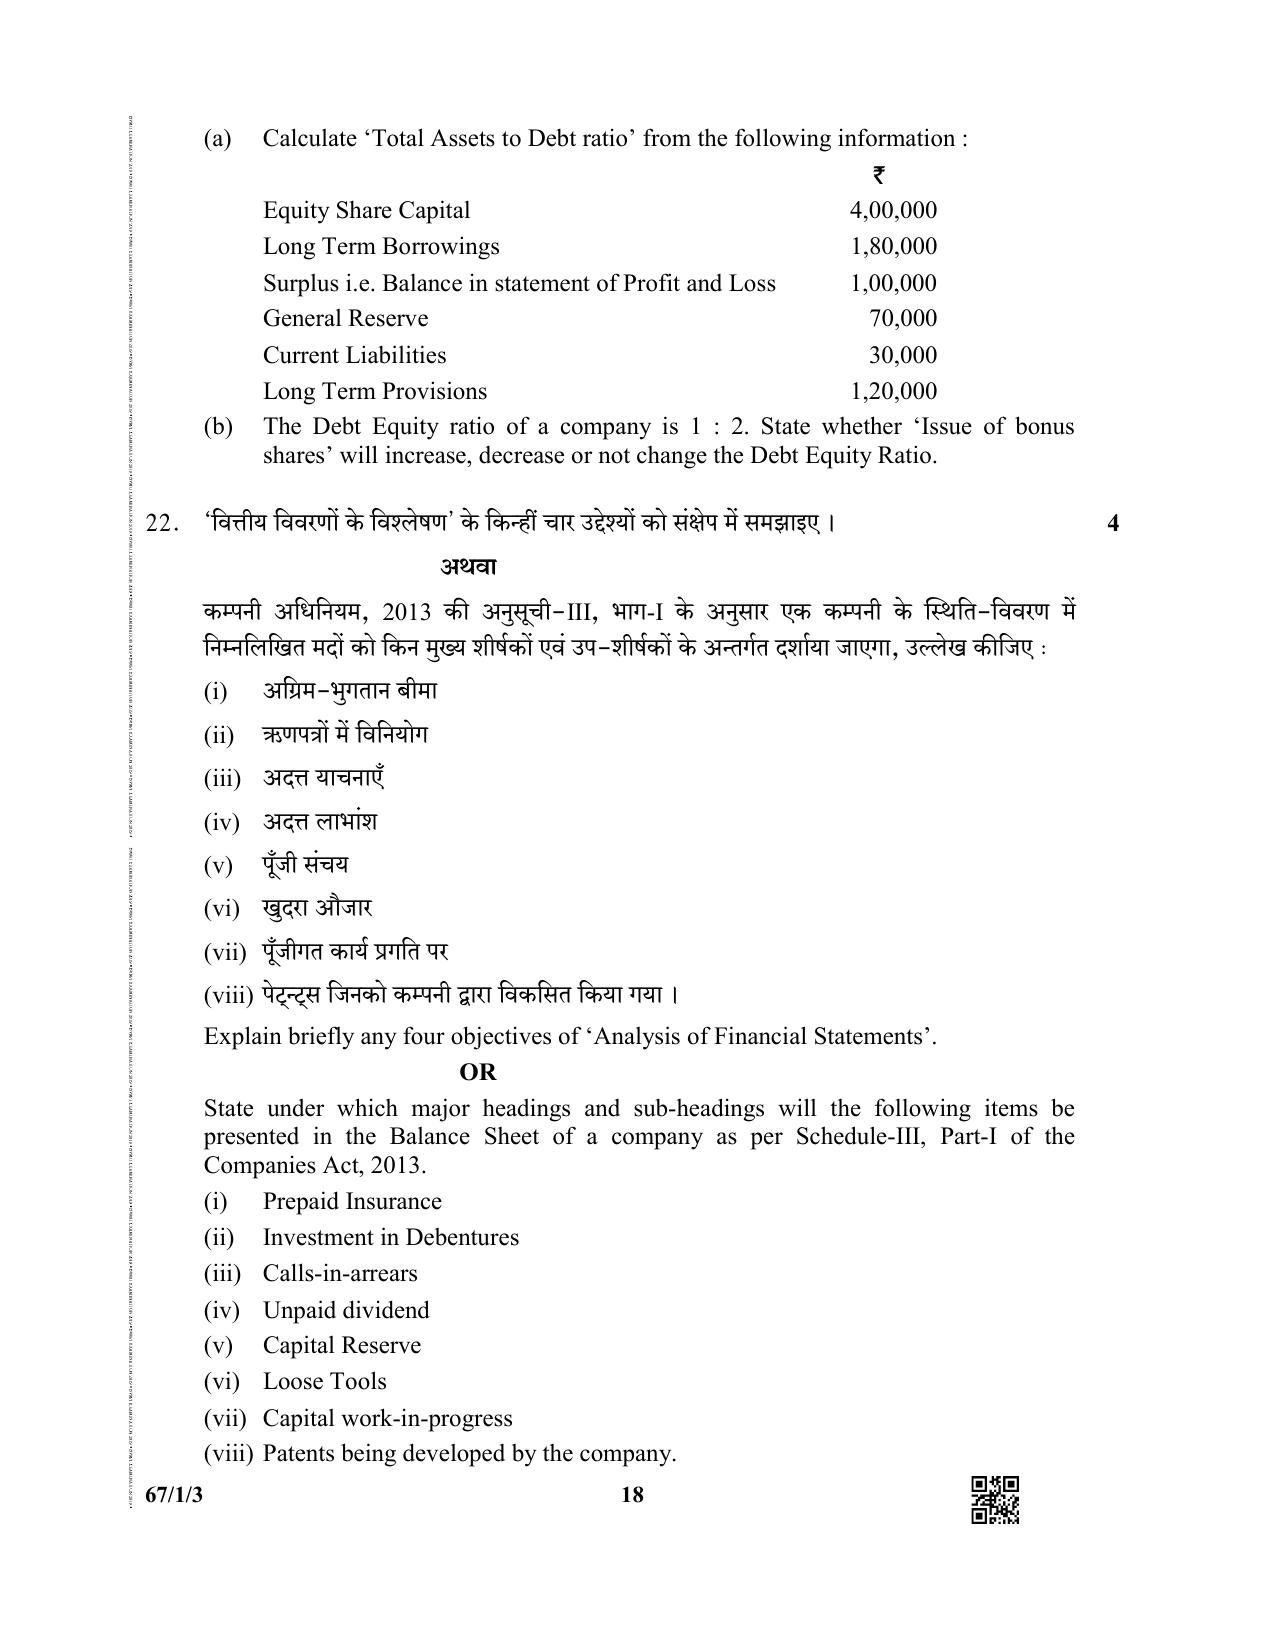 CBSE Class 12 67-1-3  (Accountancy) 2019 Question Paper - Page 18